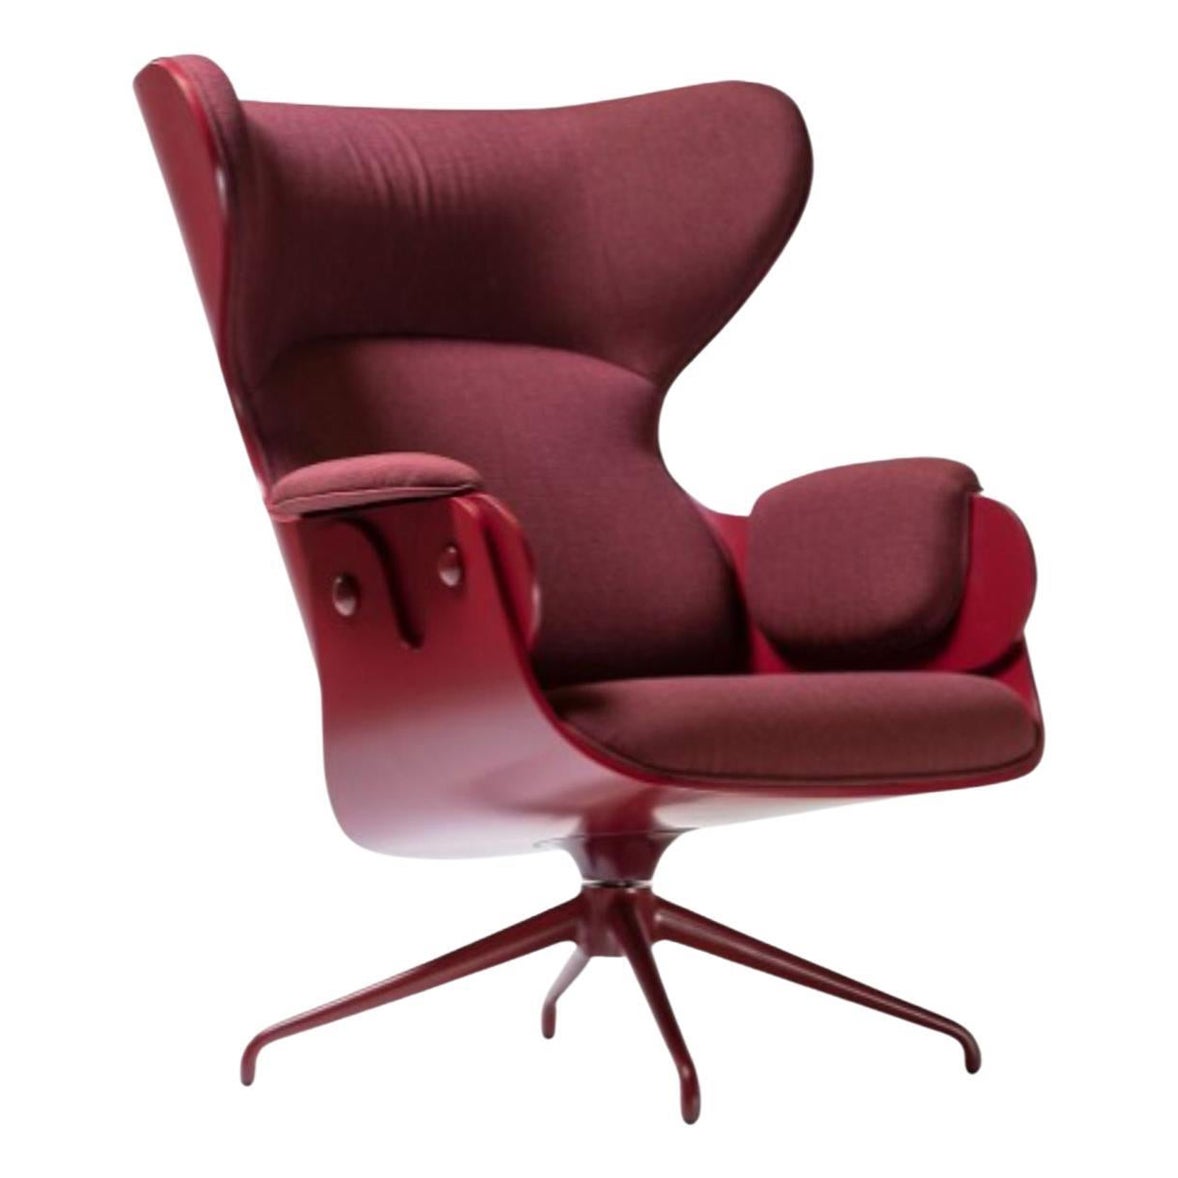 Lounger Red Armchair by Jaime Hayon For Sale